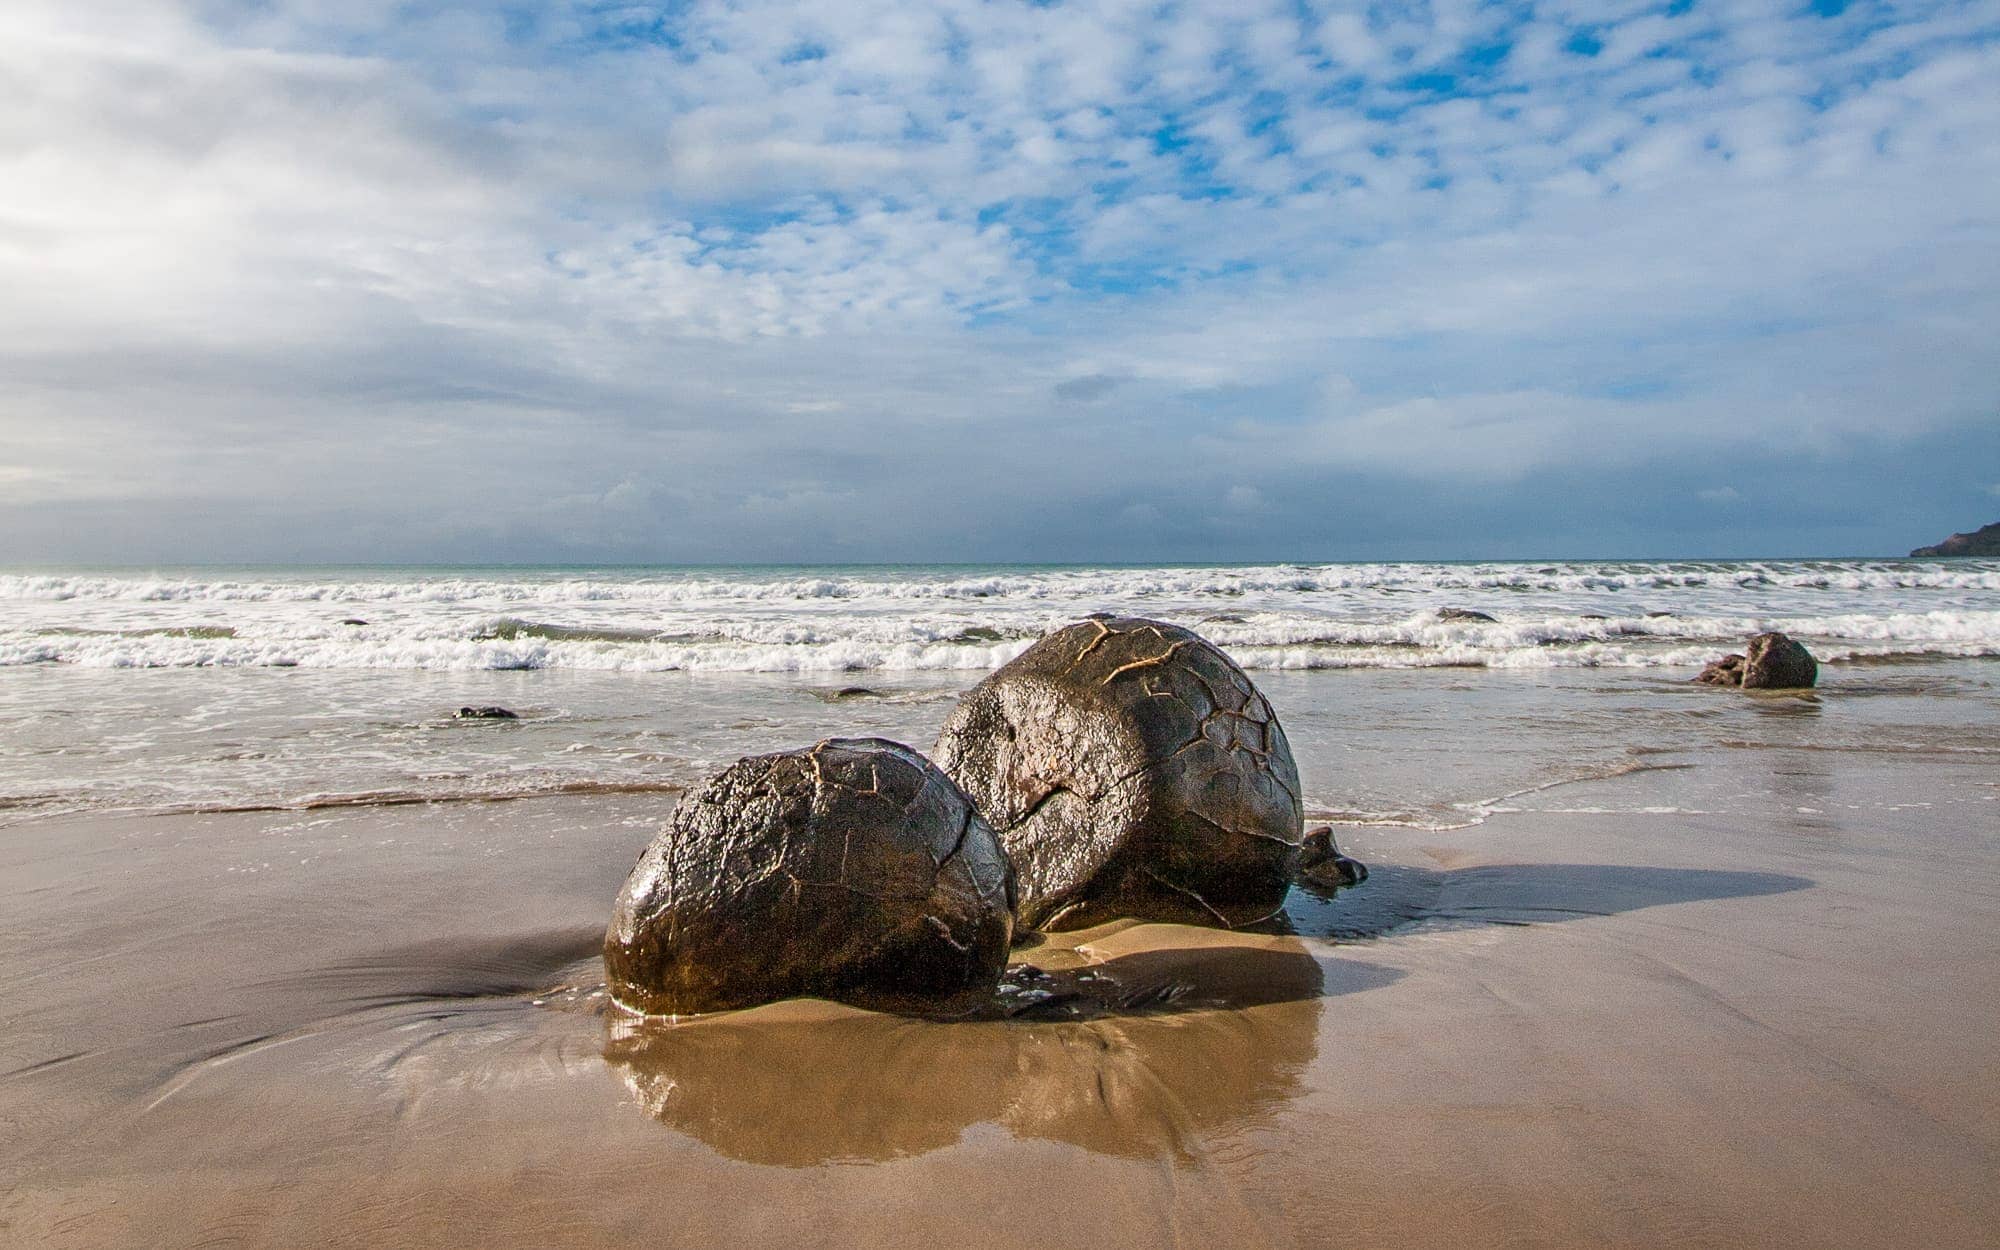 The Moeraki boulders, and other rocks